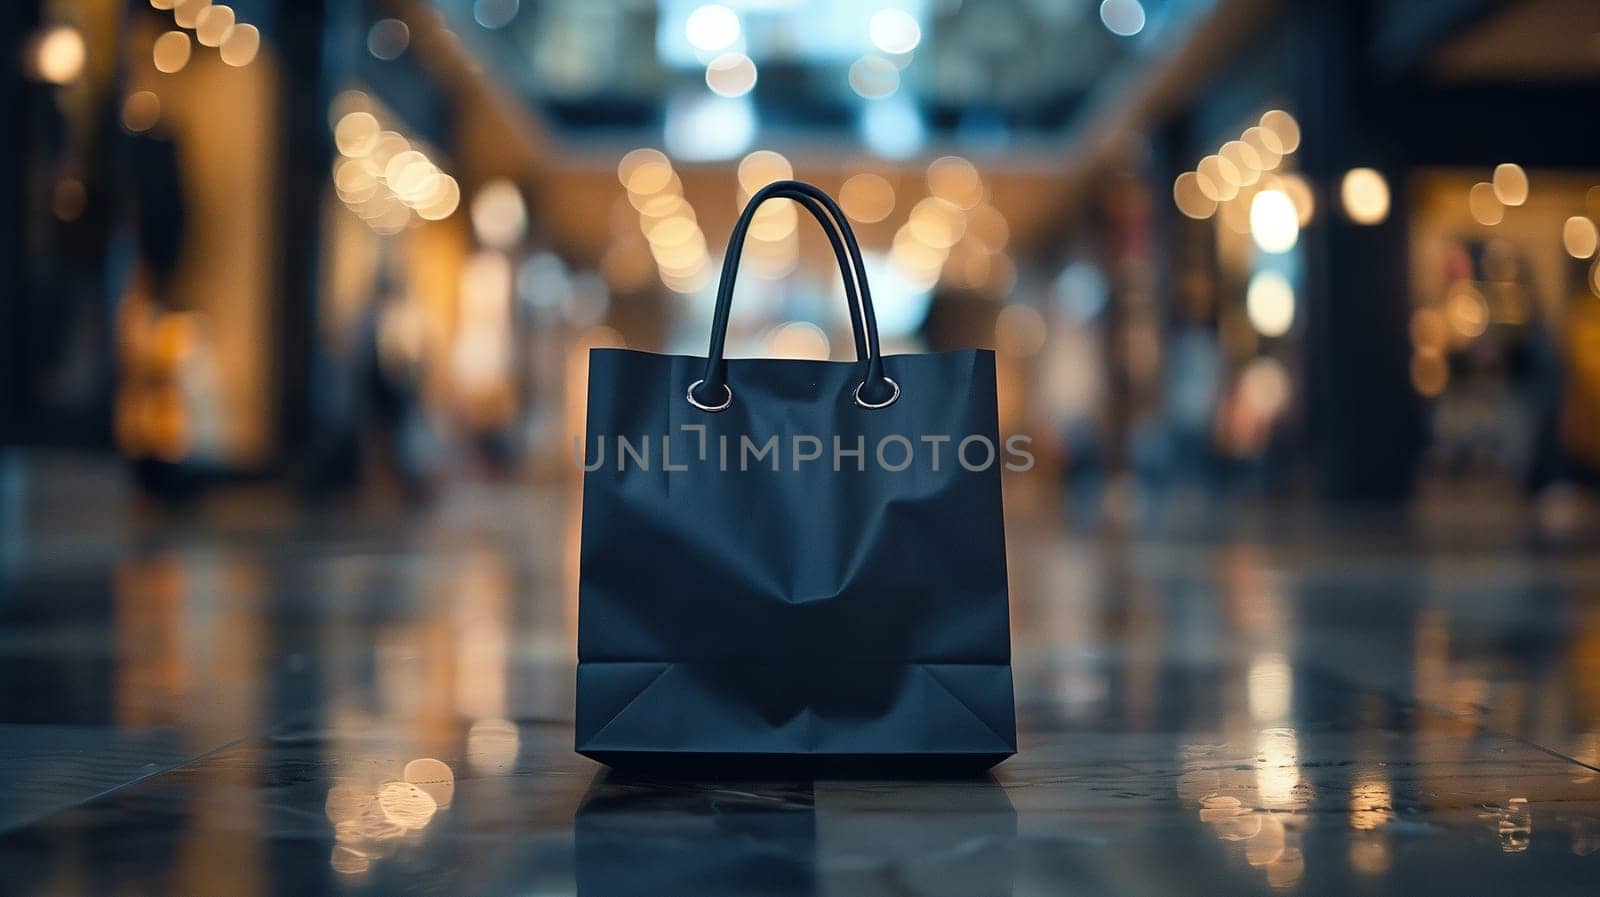 A black shopping bag sits on the ground, symbolizing the concept of a sale or Black Friday. The bag appears ready to be filled with purchases or discarded after shopping.